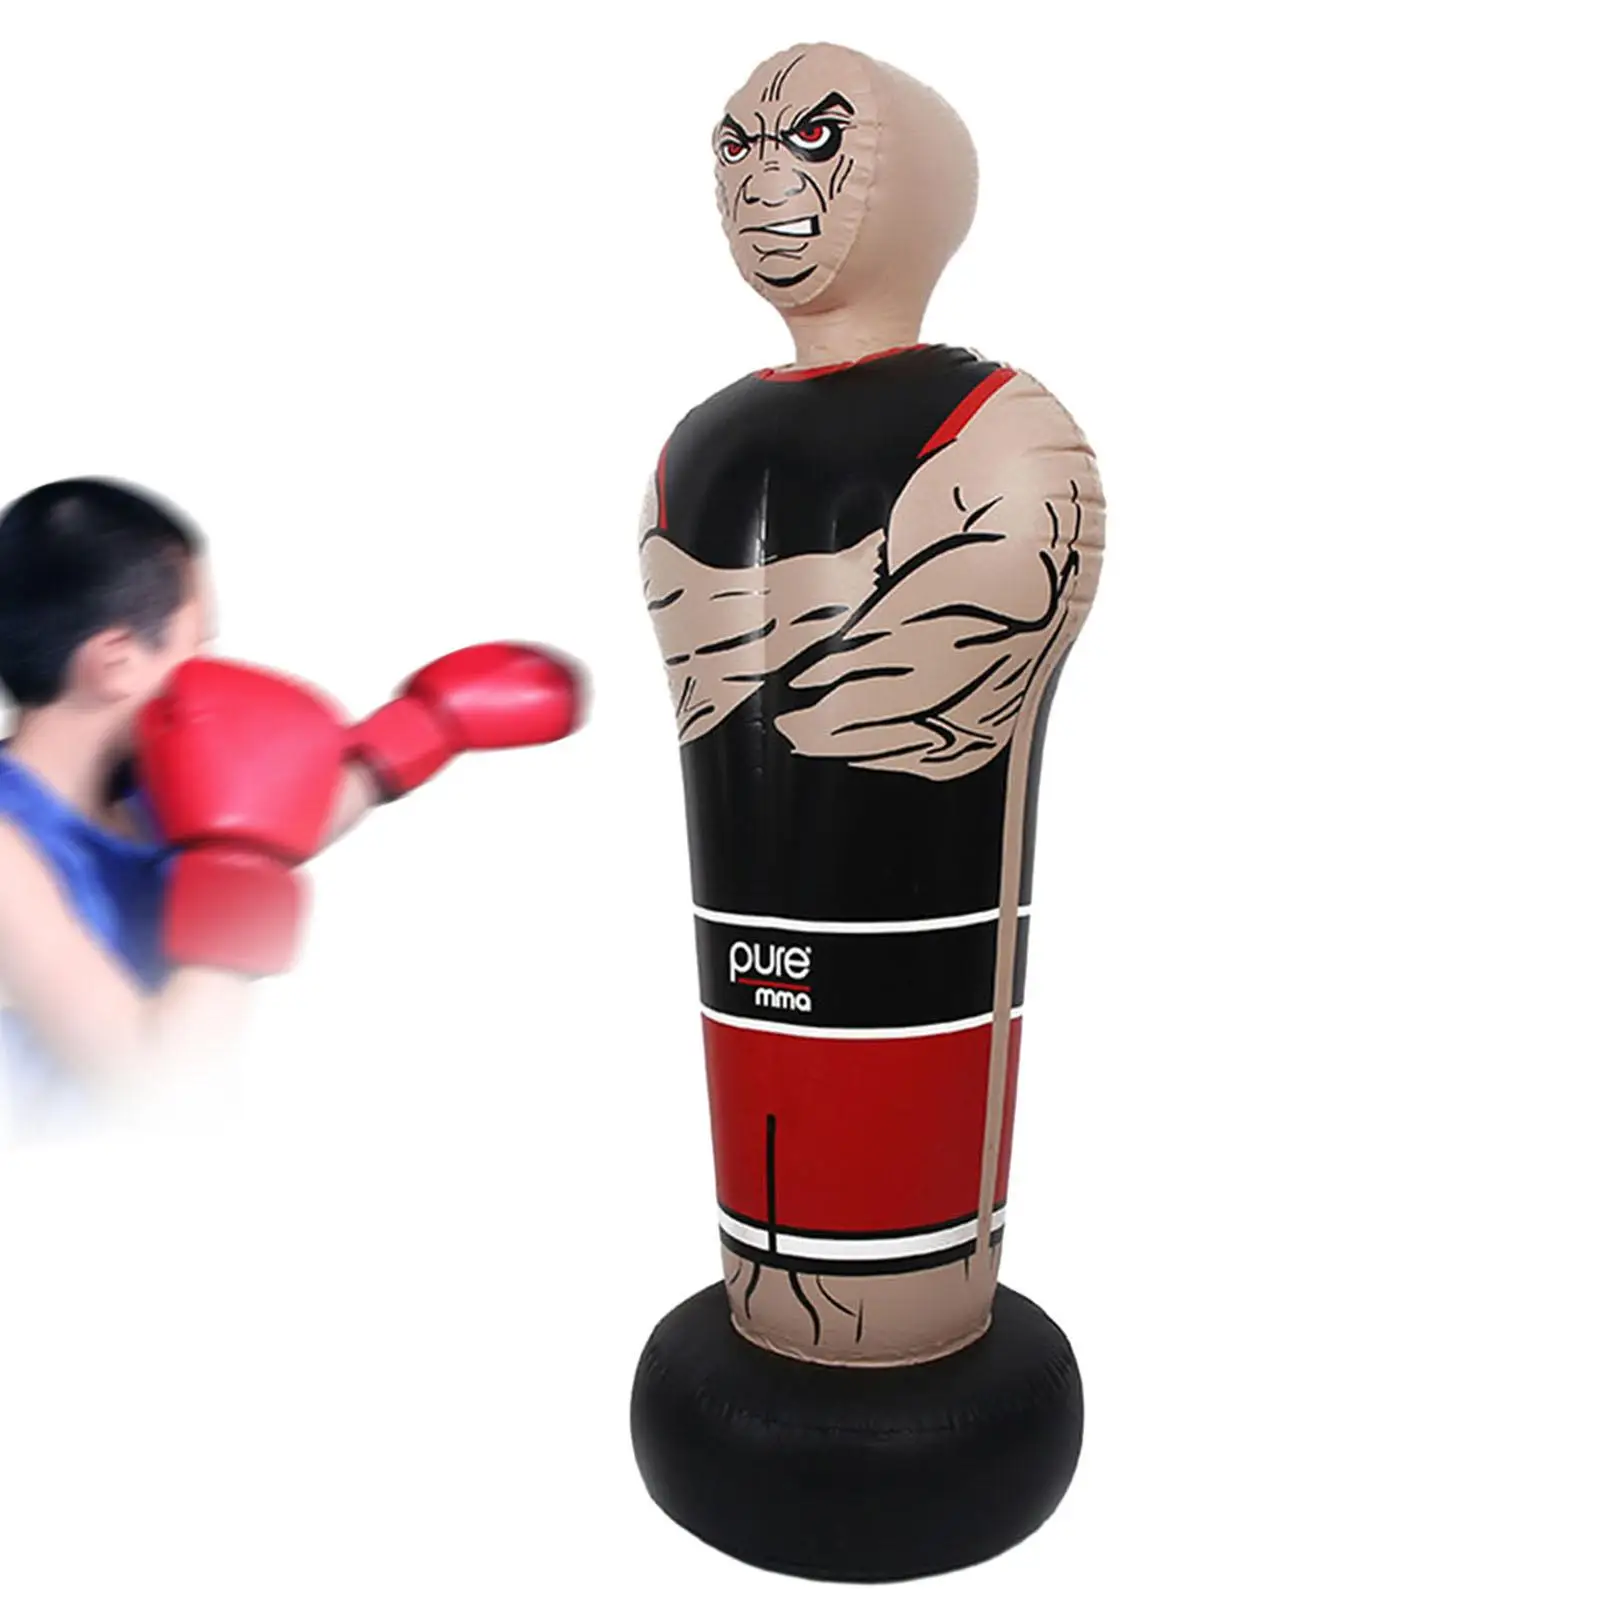 Inflatable Punching Bag Boxing Target Bag Gifts for Boys for Kids Adults for Practice Workout Sports Indoor Outdoor Taekwondo